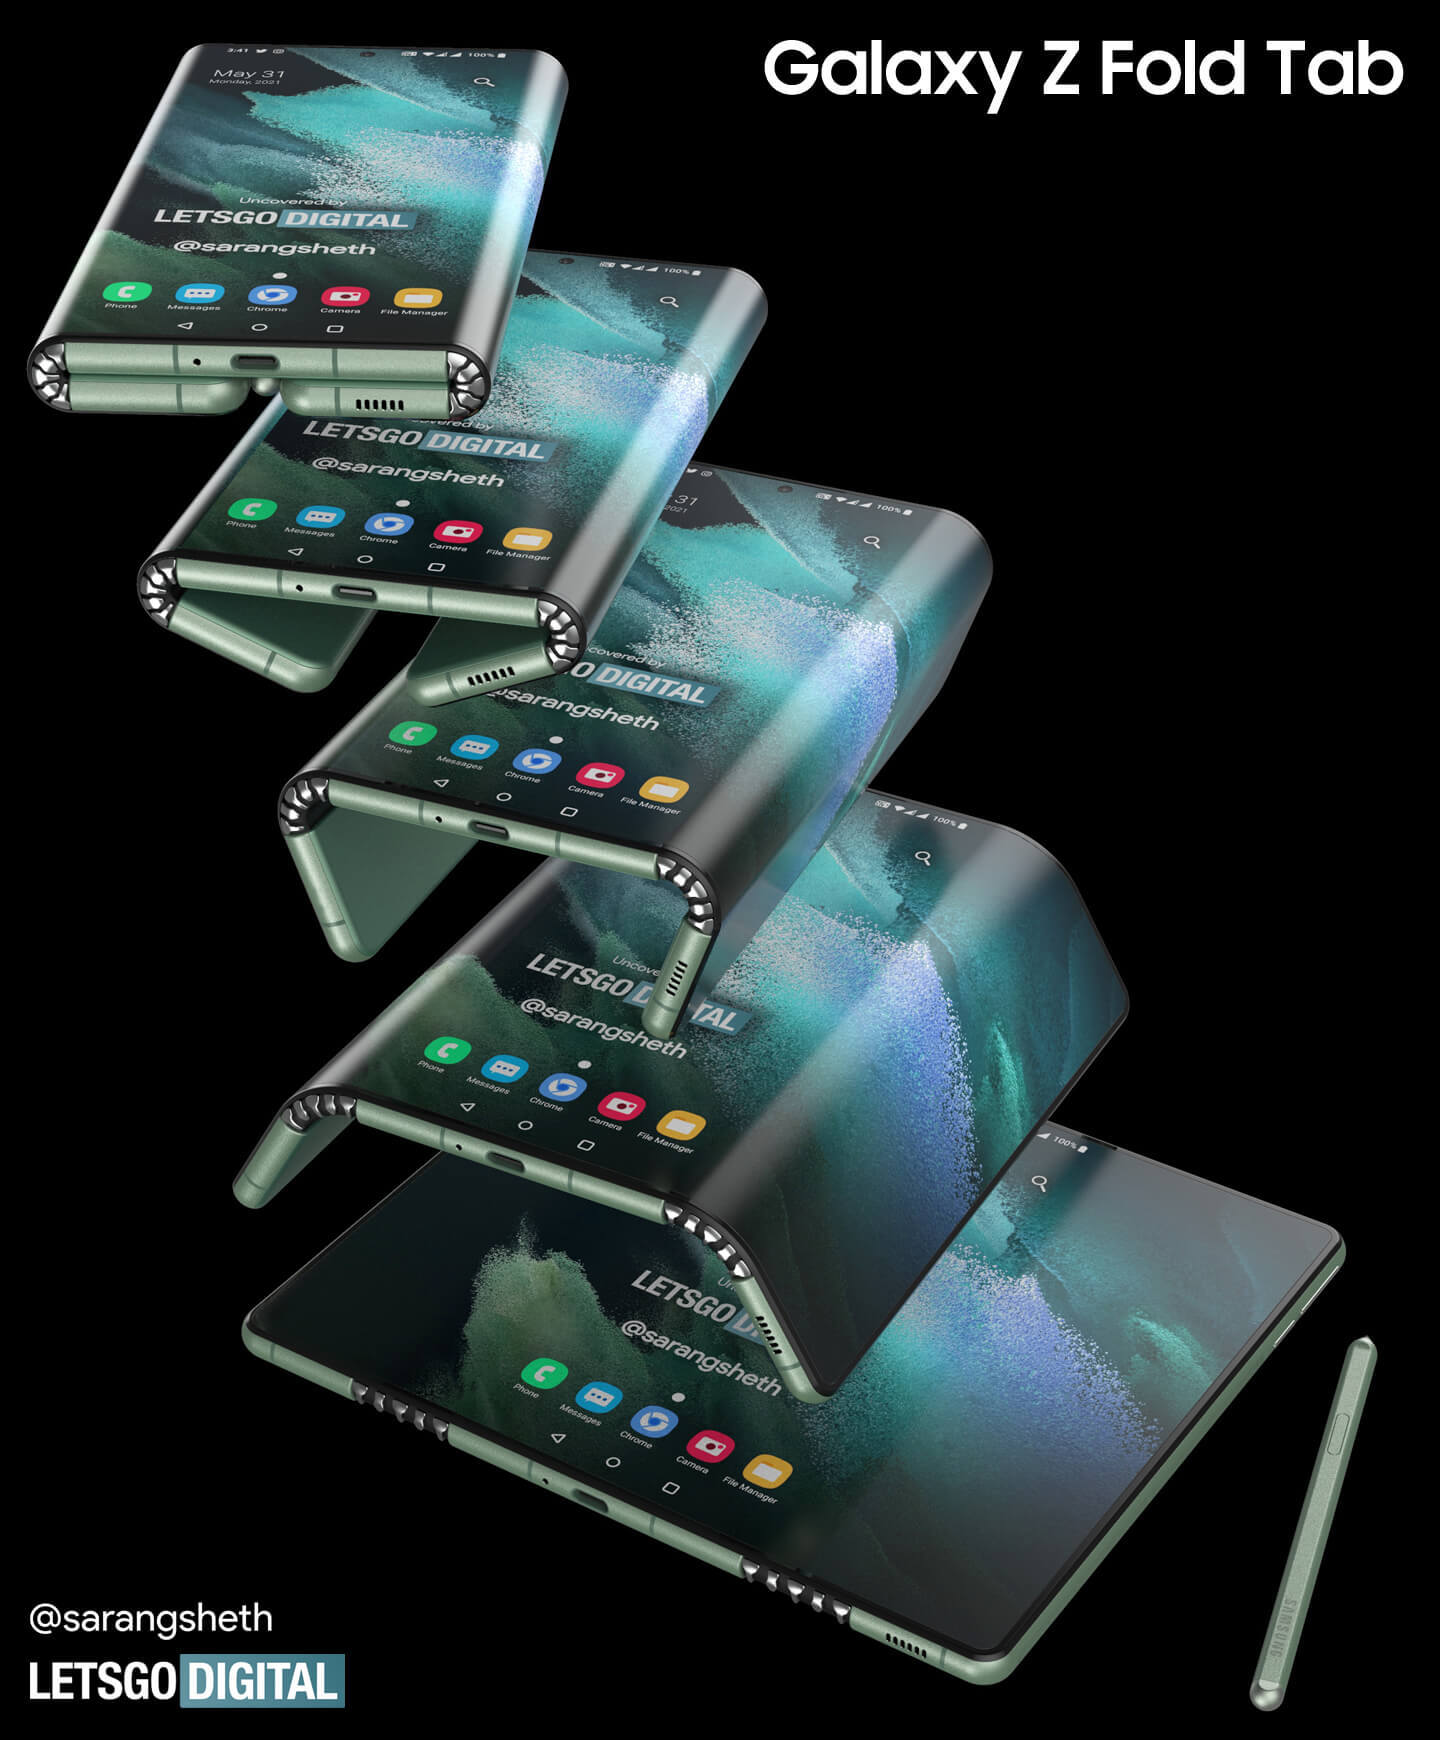 Renders of the Galaxy Z Fold Tab - Tri-fold Galaxy Z Fold Tab renders appear with two hinges and large tablet-like screen